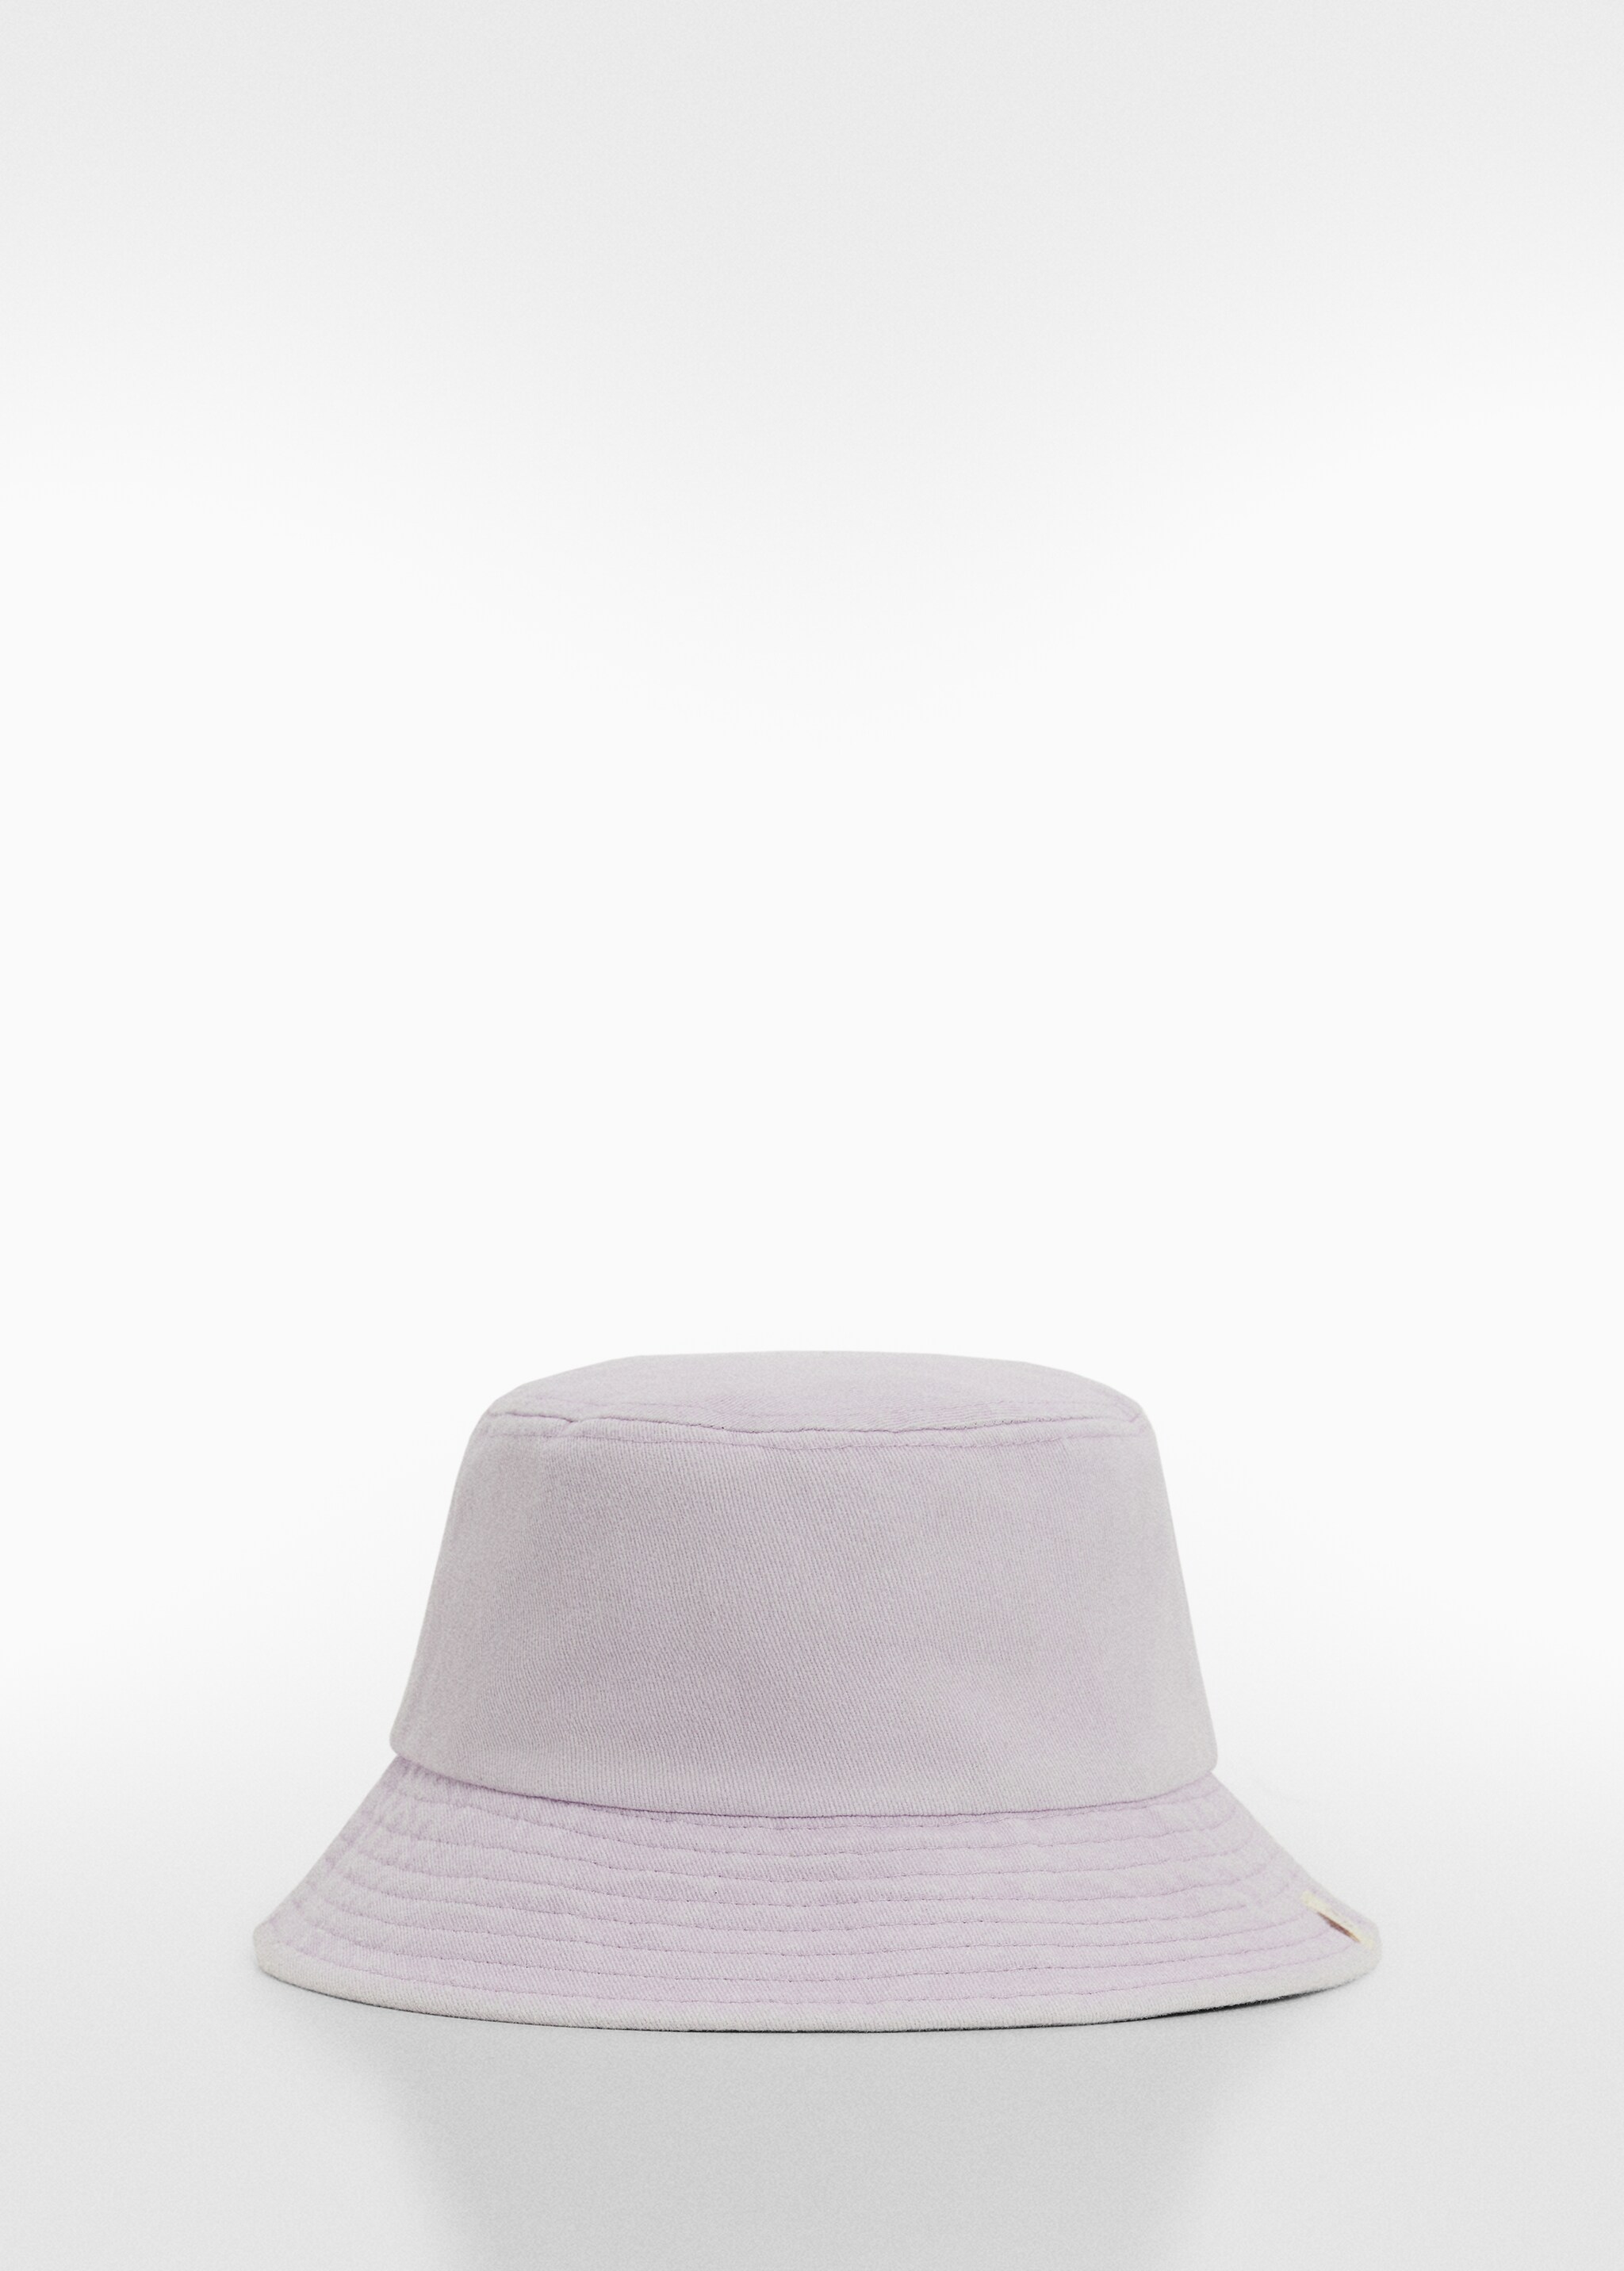 Bucket hat - Article without model